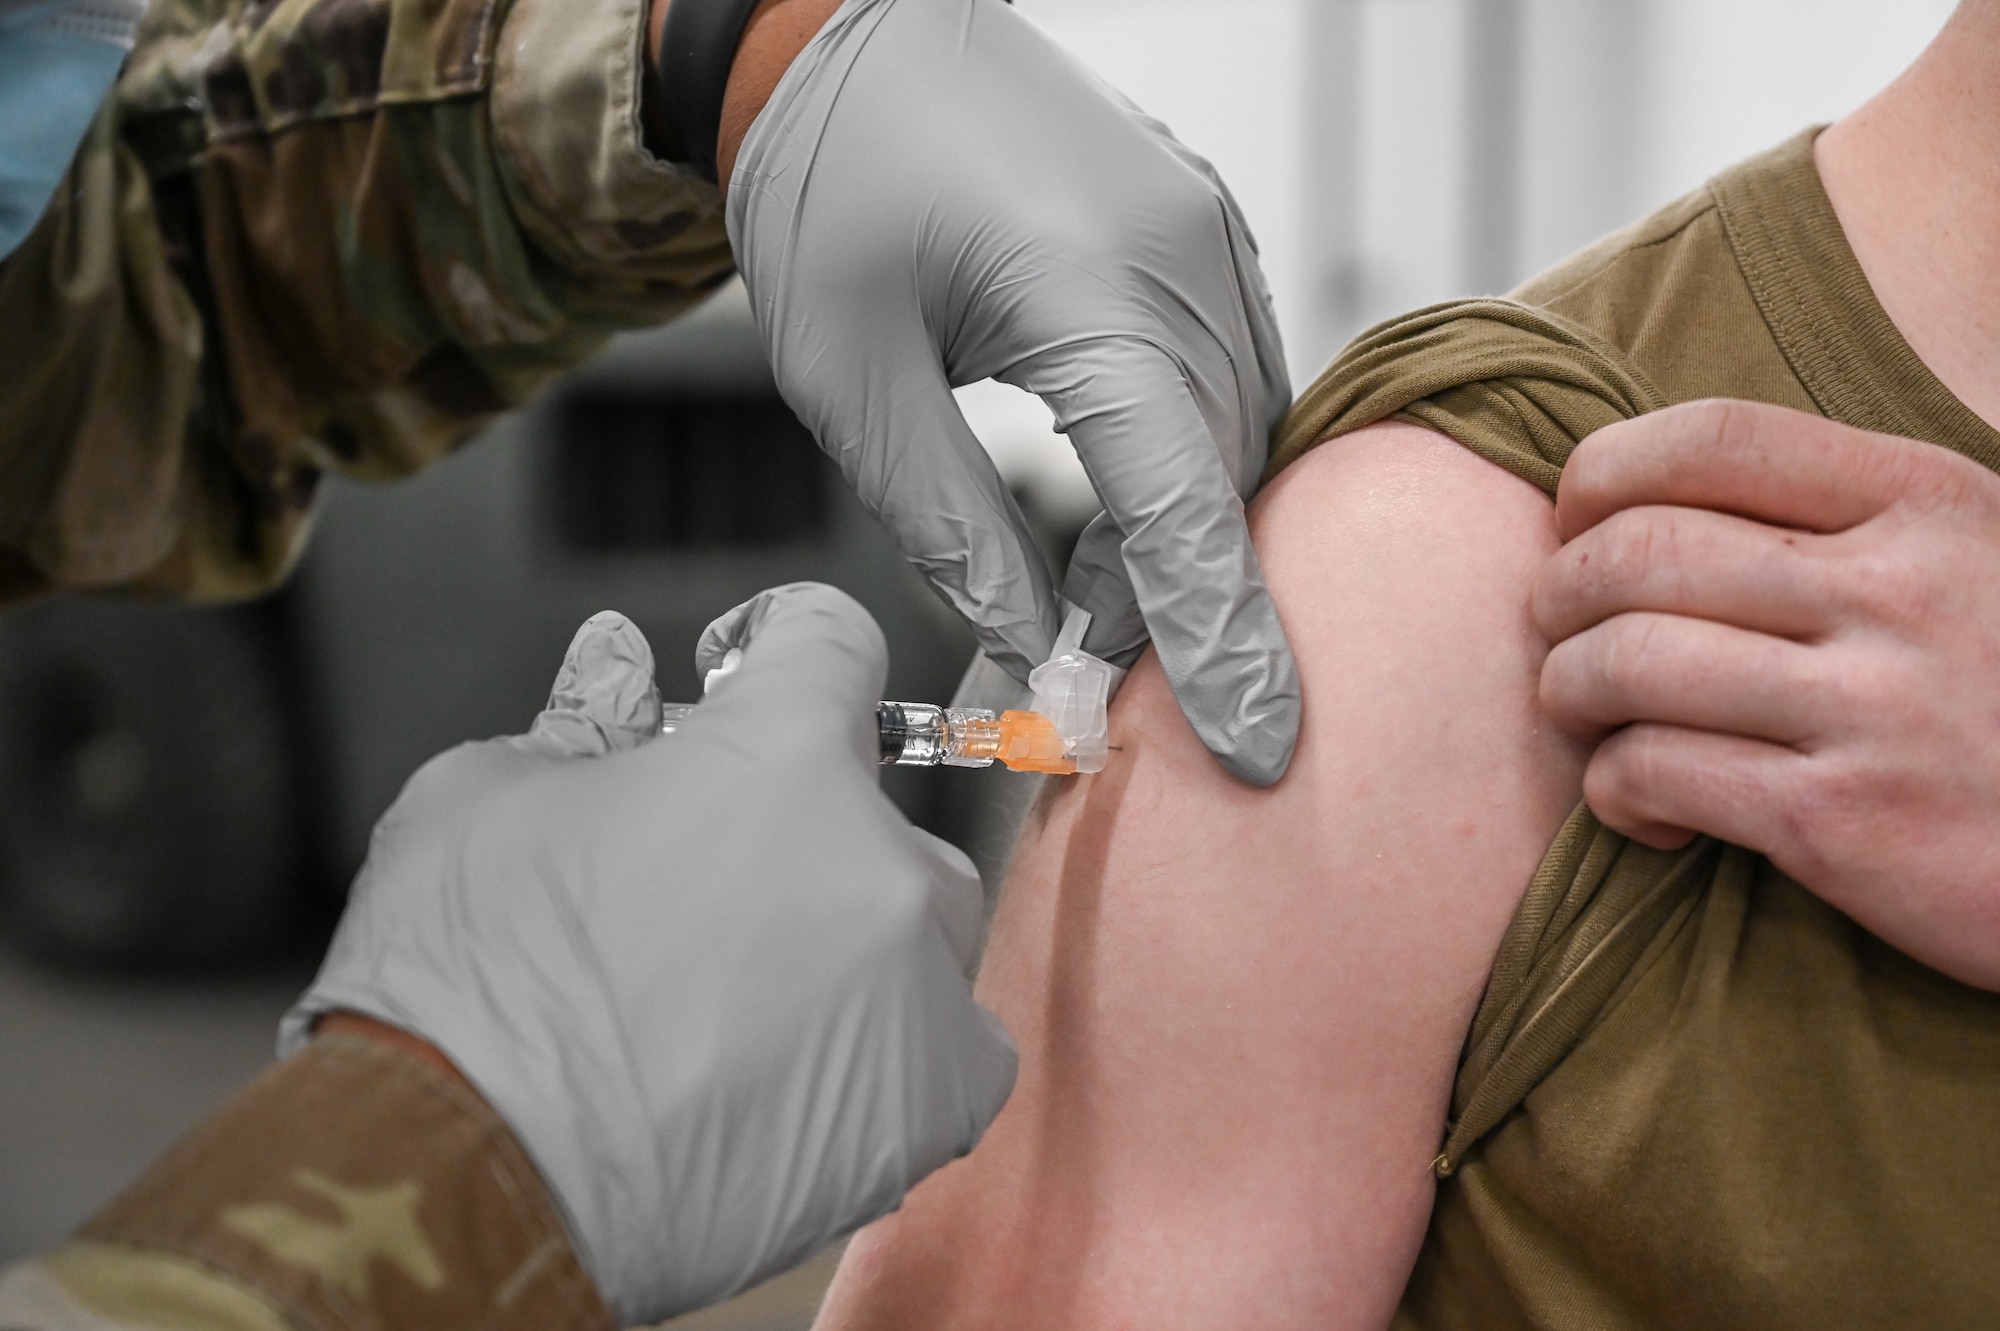 An Airmen receives a flu vaccination shot Dec. 17, 2020, at Hill Air Force Base, Utah, from Airman 1st Class Carlos Cheatham, 75th Medical Group. The CDC recommends seasonal influenza vaccine for all people 6 months of age and older. The best way to prevent seasonal flu is to get vaccinated every year. (U.S. Air Force photo by Cynthia Griggs)